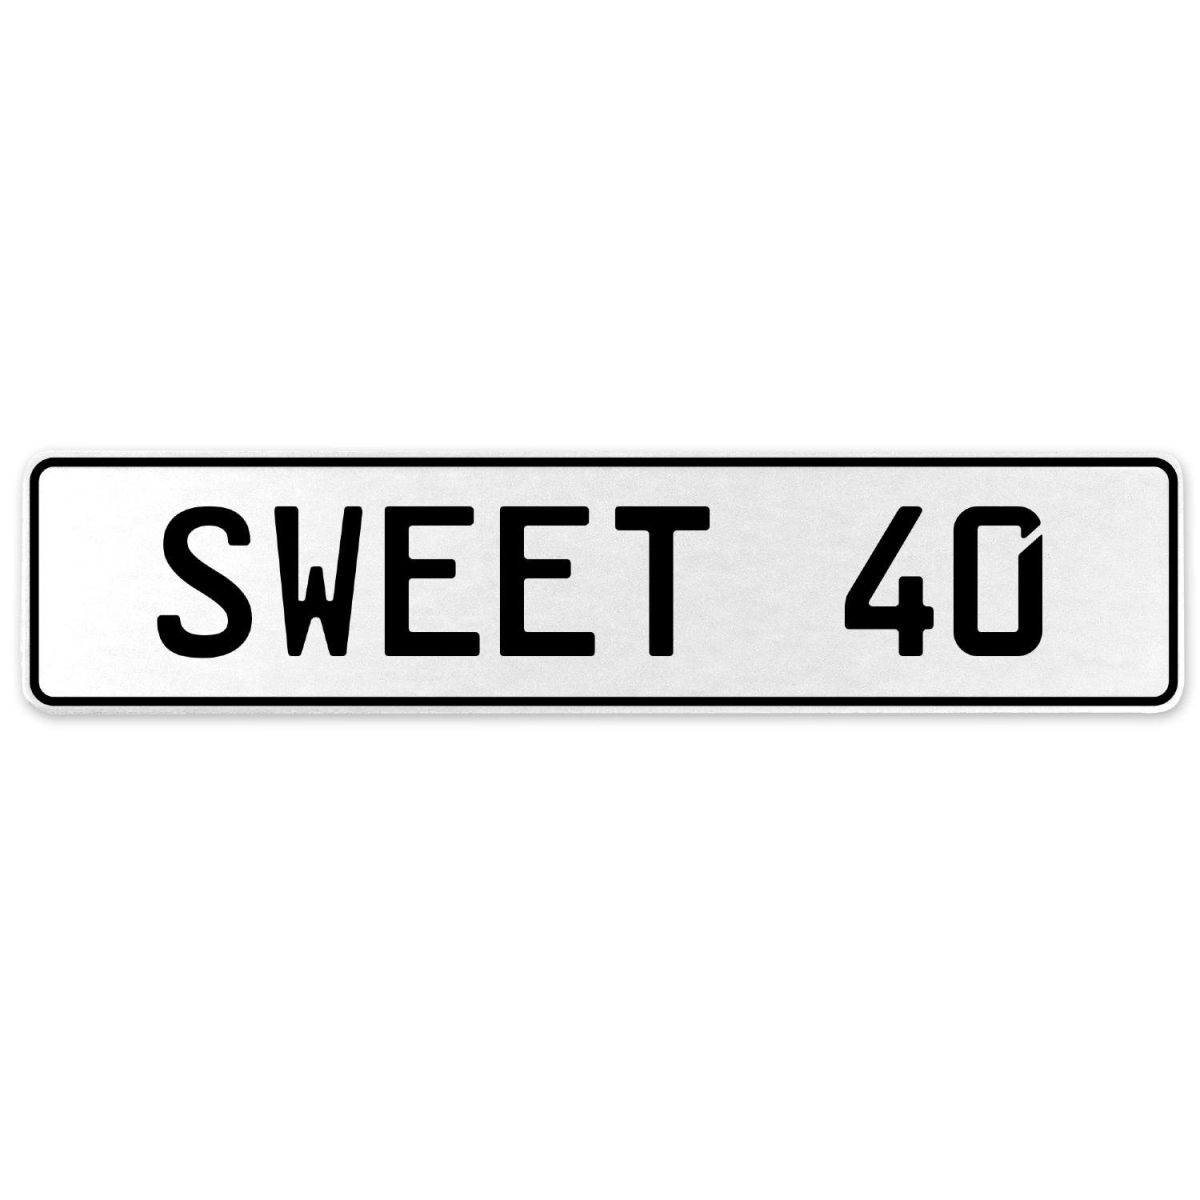 554142 Sweet 40 - White Aluminum Street Sign Mancave Euro Plate Name Door Sign Wall